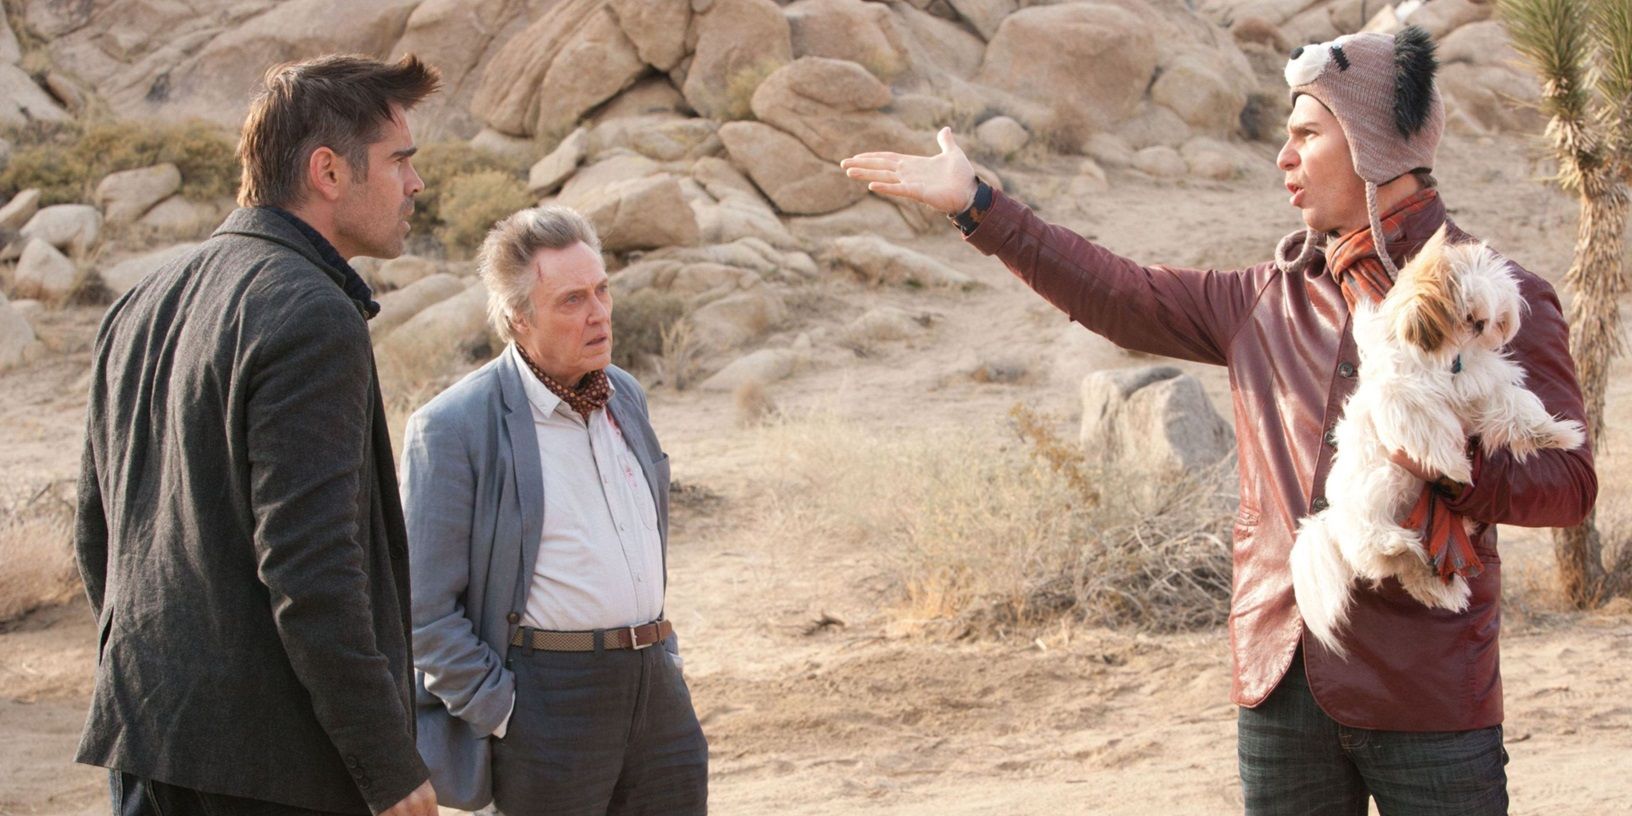 Colin Farrell, Christopher Walken, and Sam Rockwell in the desert in Seven Psychopaths